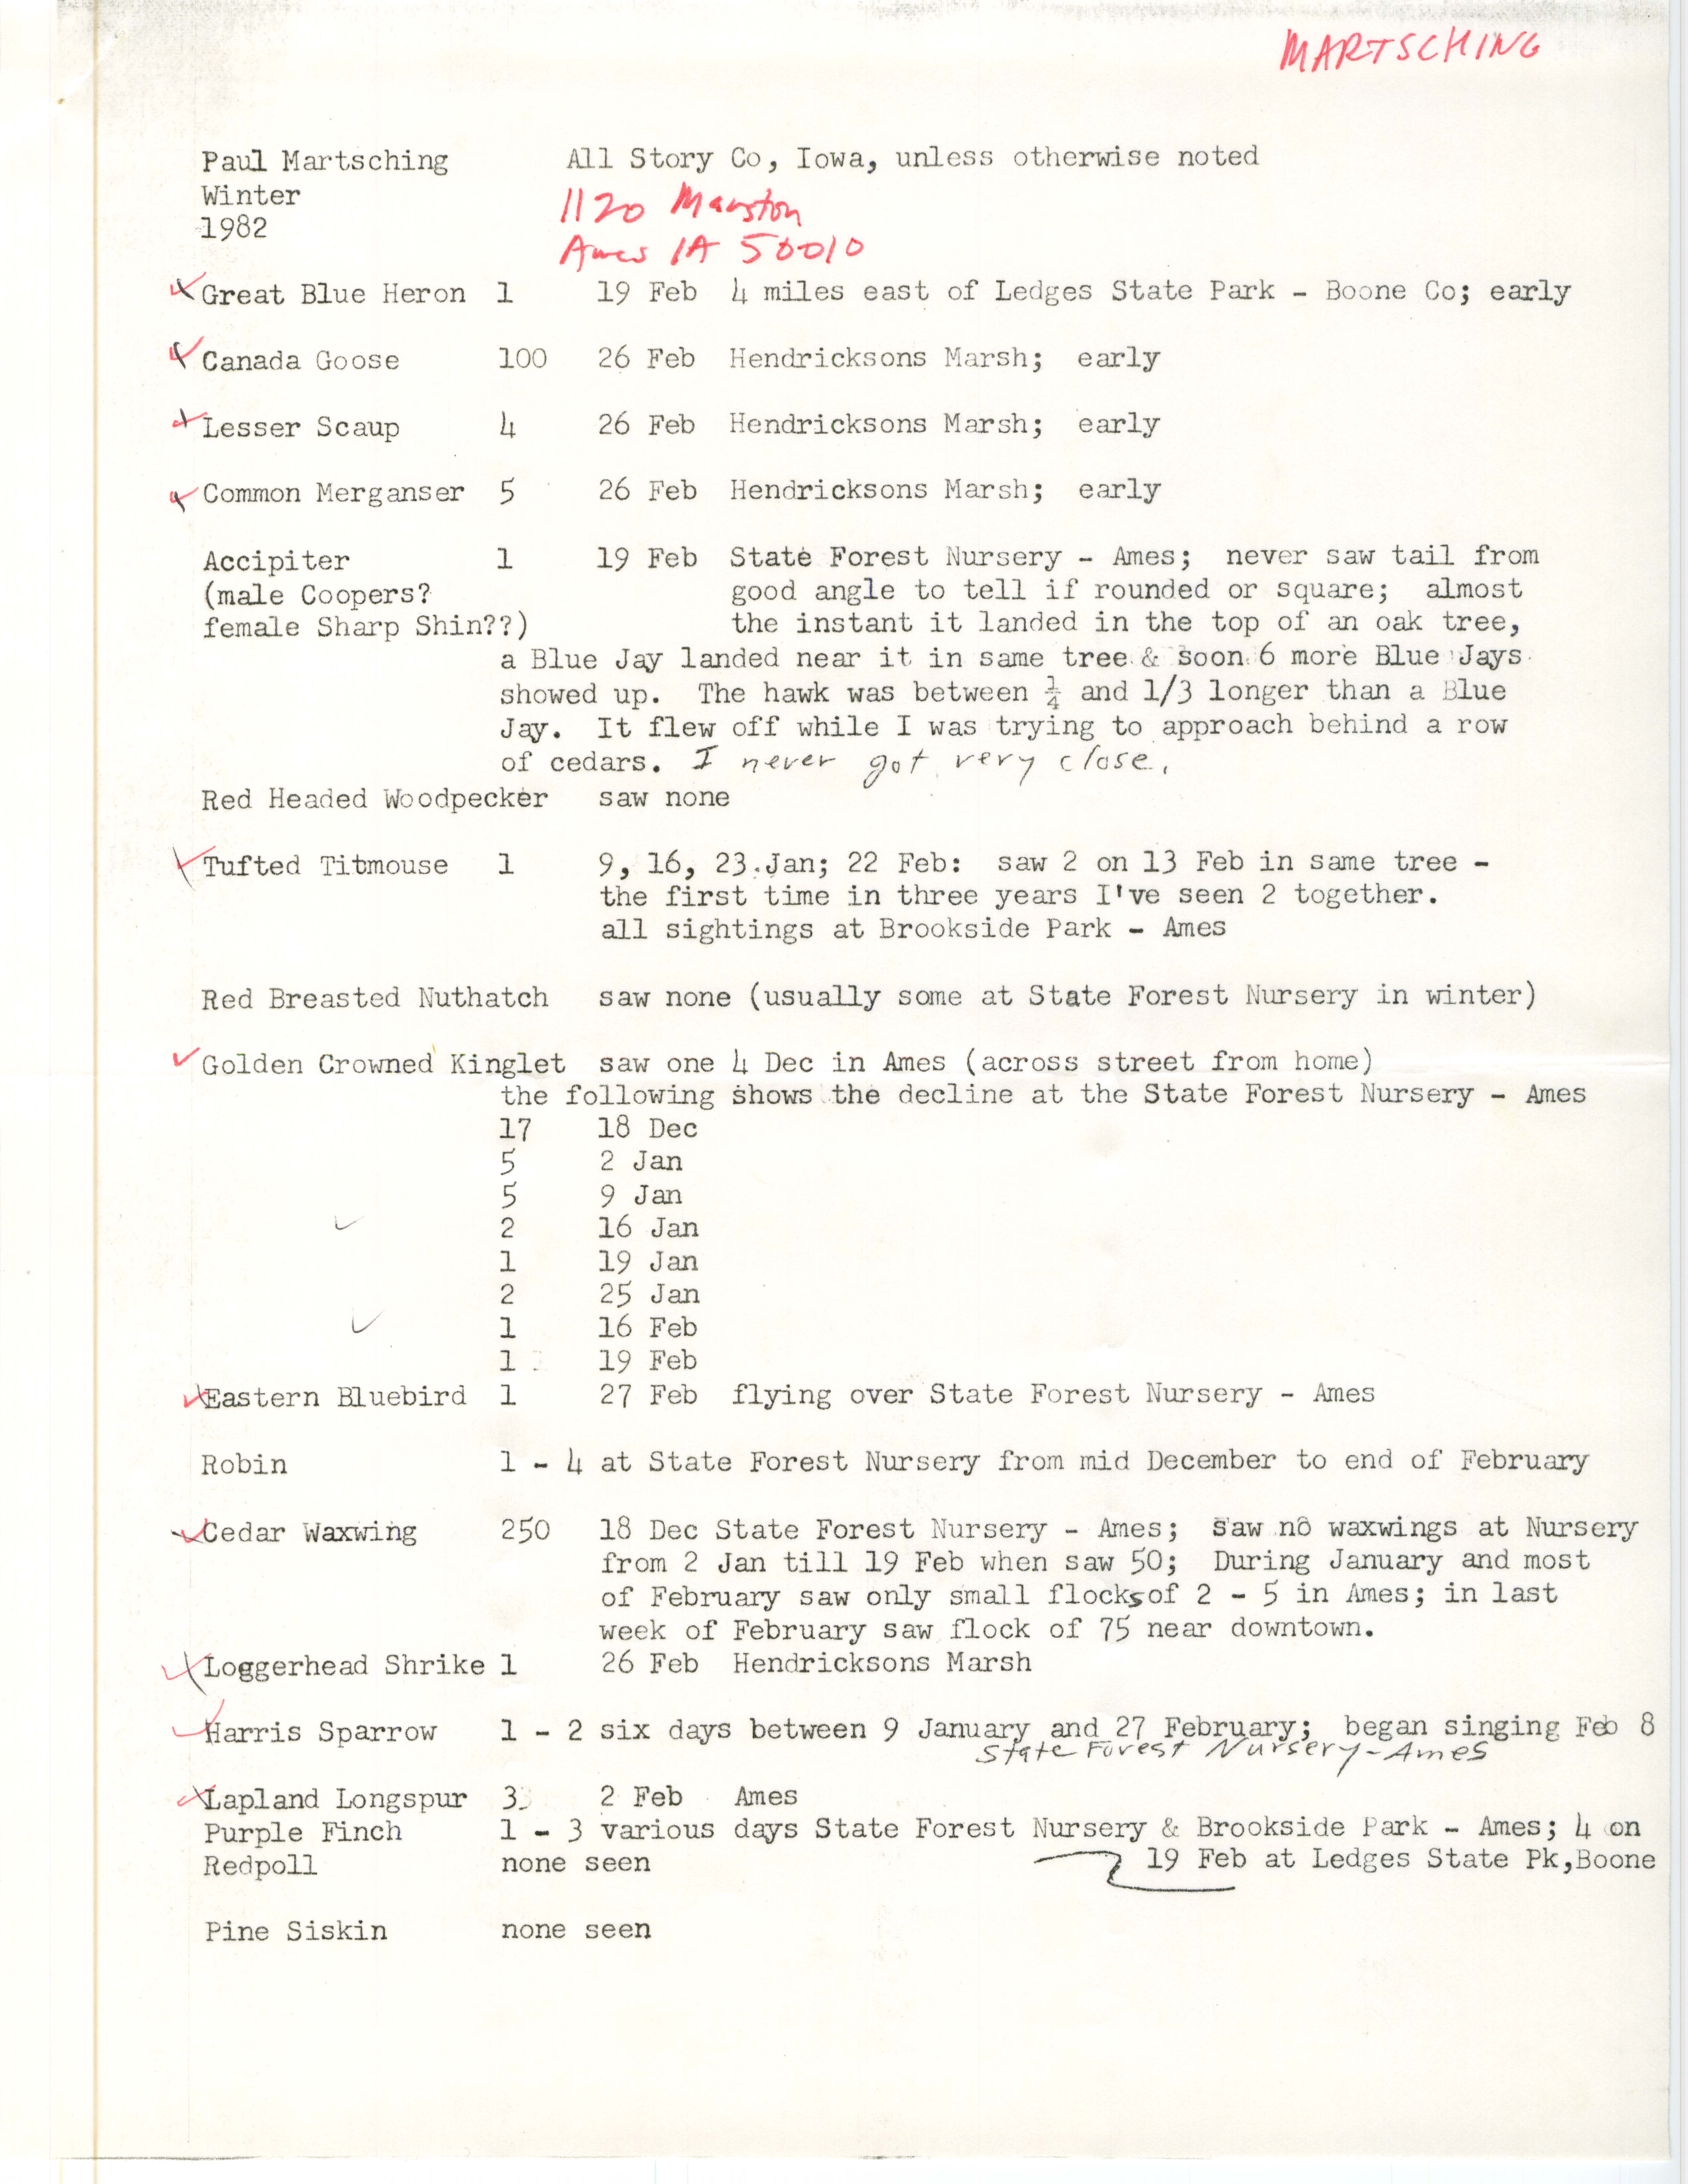 Field notes contributed by Paul Martsching, winter 1982-1983